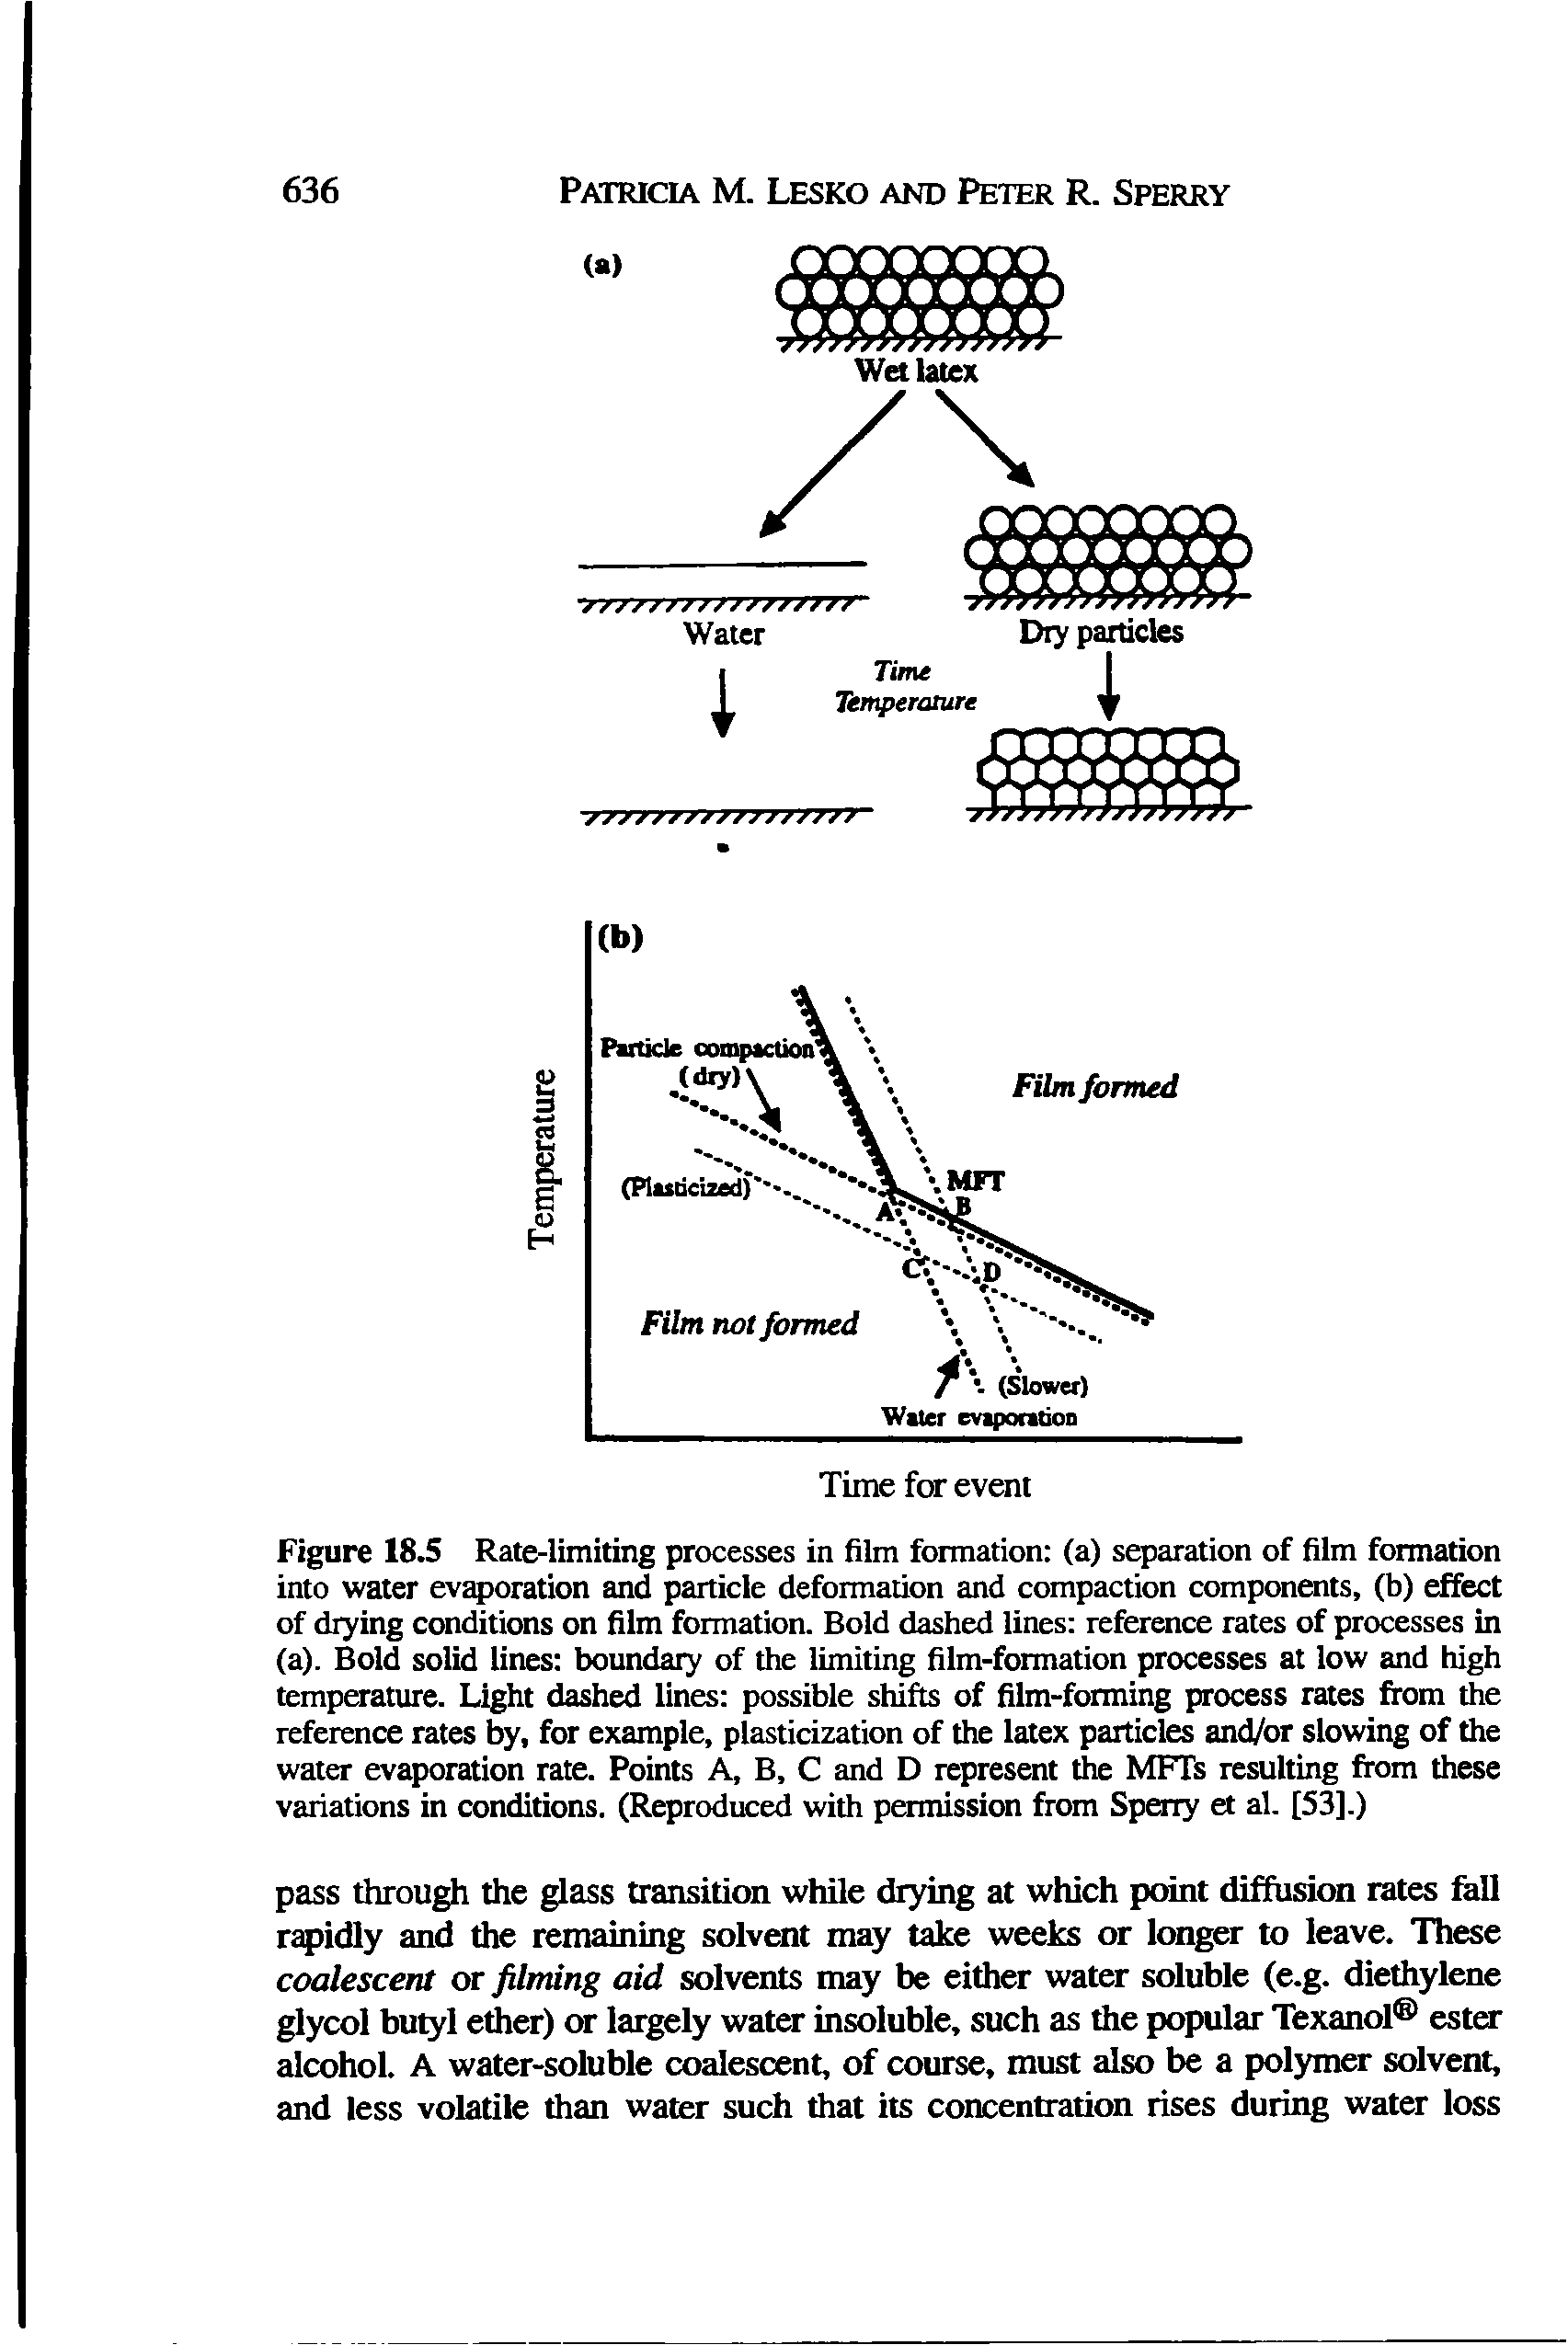 Figure 18.5 Rate-limiting processes in film formation (a) separation of film formation into water ev oration and particle deformation and compaction components, (b) effect of drying conditions on film formation. Bold dashed lines reference rates of processes in (a). Bold solid lines boundary of the limiting film-formation processes at low and high temperature. Light dashed lines possible shifts of film-forming process rates from the reference rates by, for example, plasticization of the latex particles and/or slowing of the water evaporation rate. Points A, B, C and D represent the MFTs resulting from these variations in conditions. (Reproduced with permission from Sperry et al. [53].)...